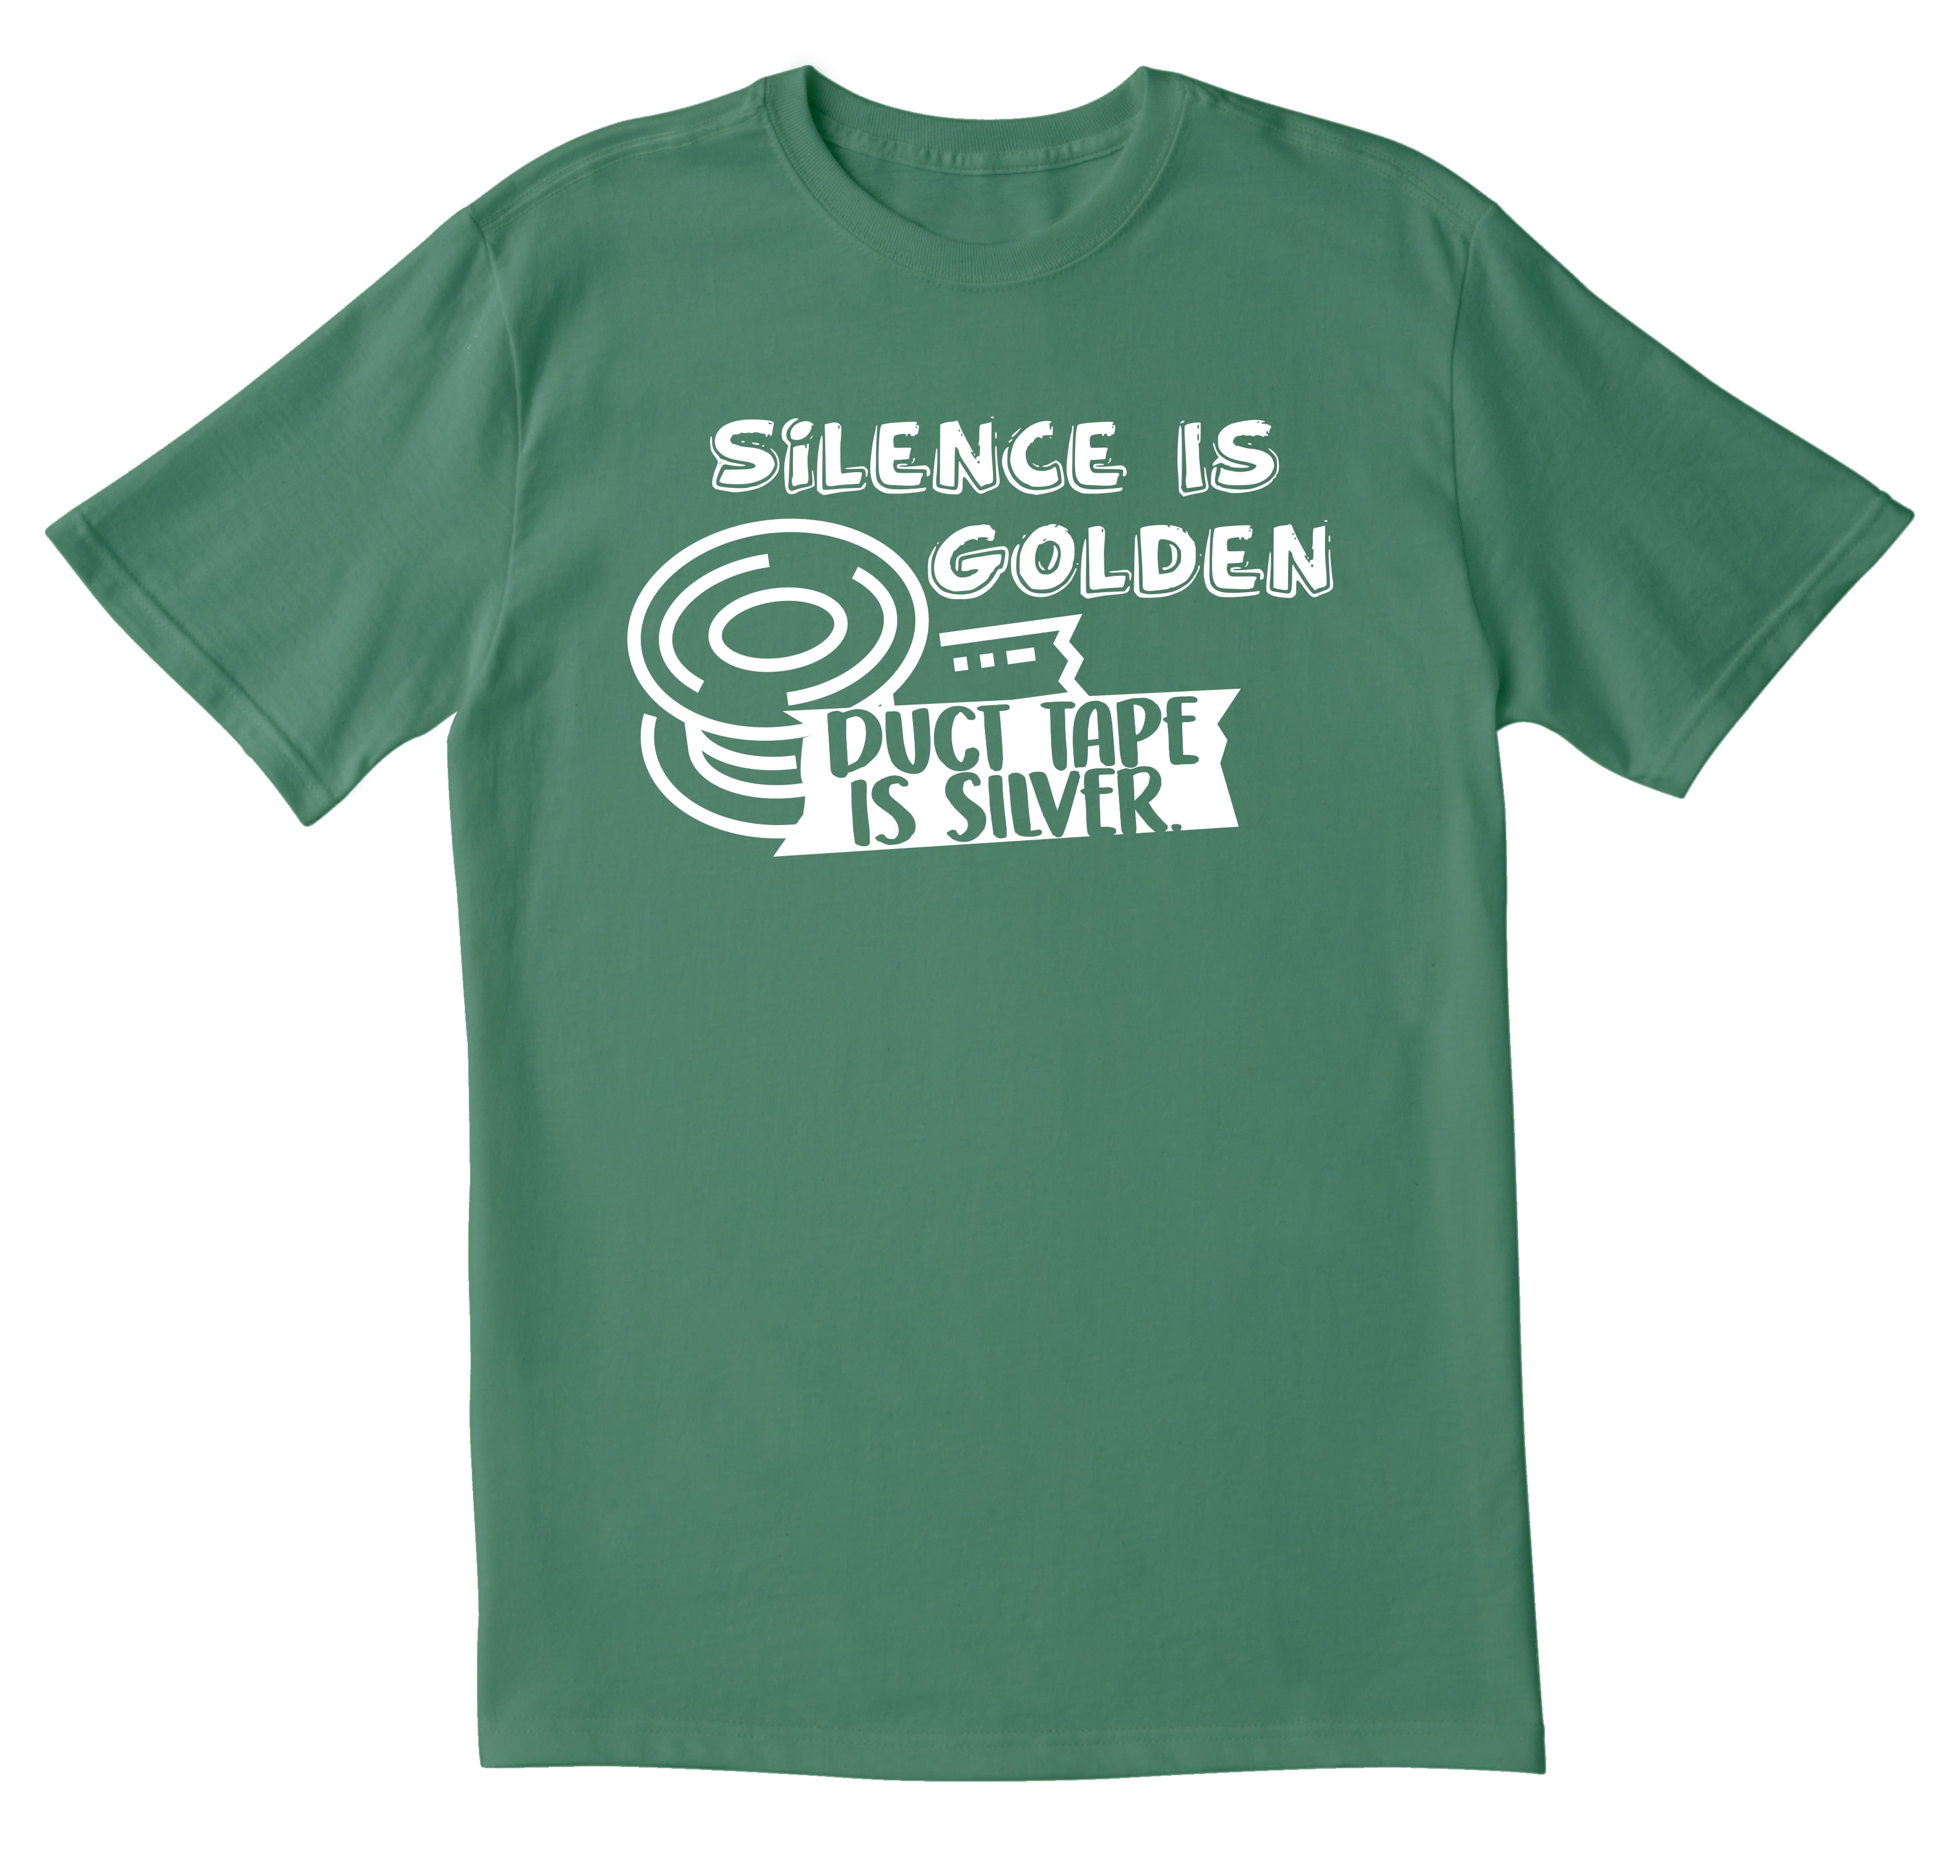 Silence is Golden Duct Tape is Silver Adult Humor Cool Sarcastic Funny T Shirts 7 Size